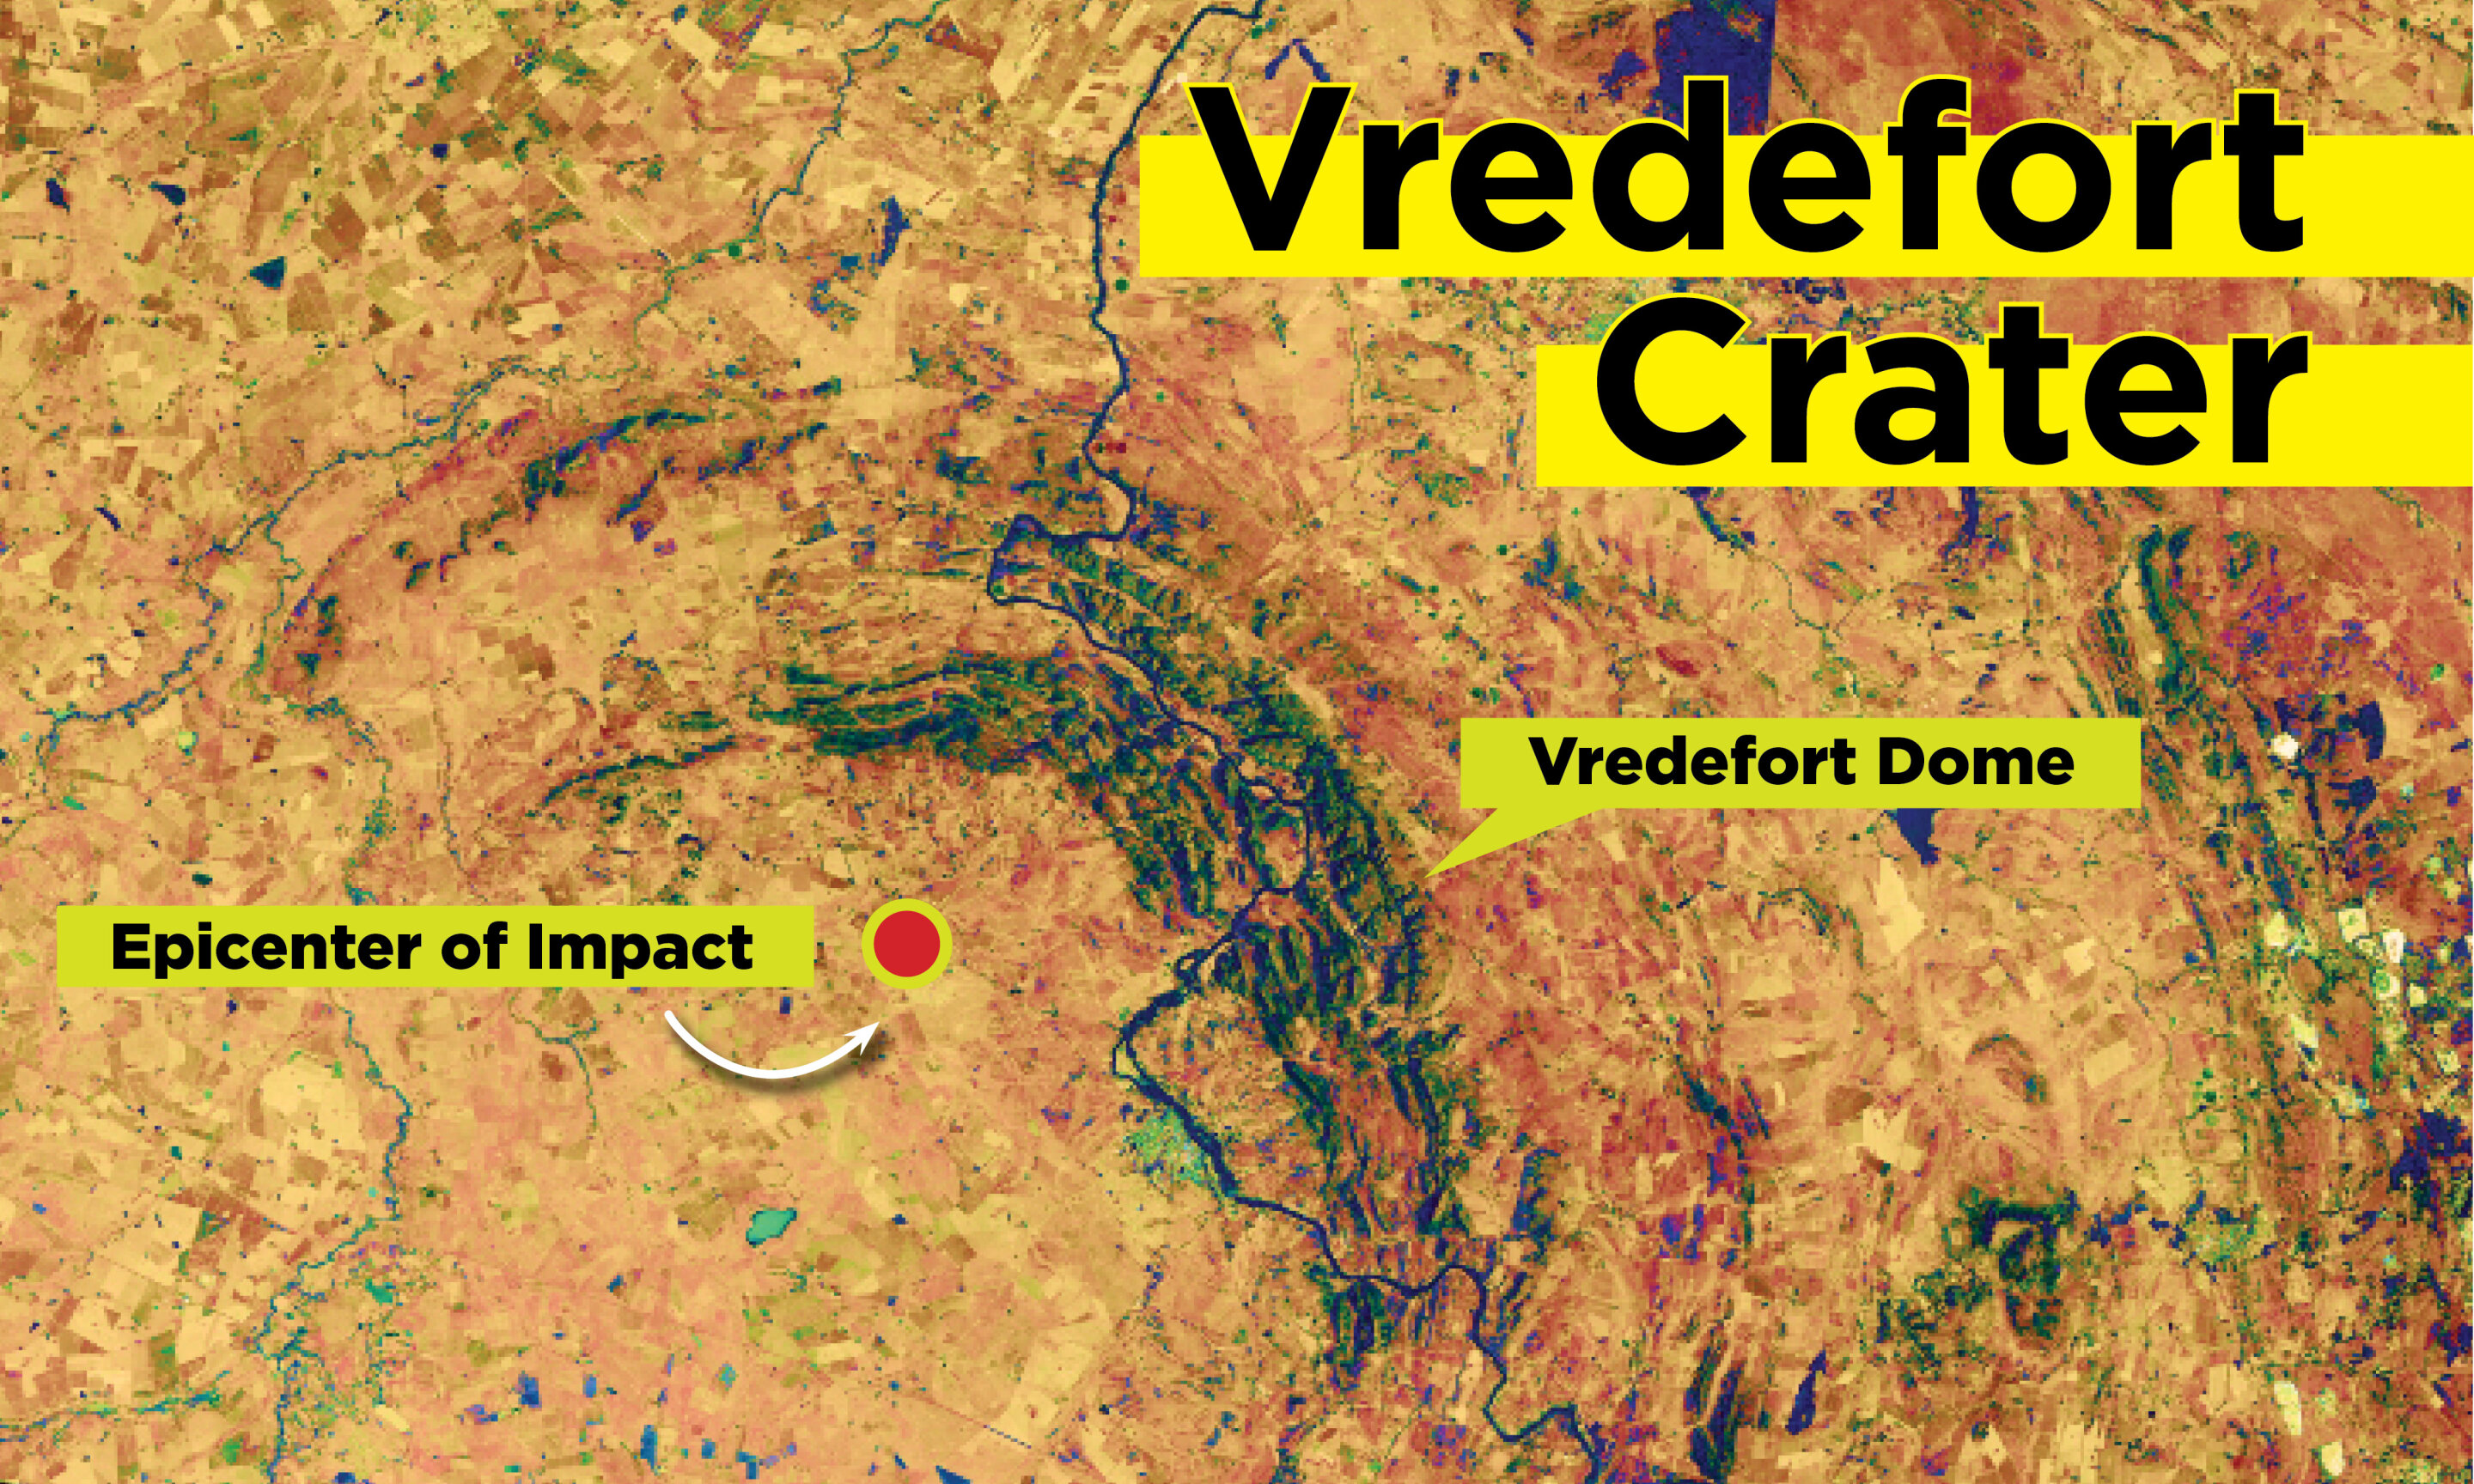 The asteroid that formed Vredefort crater was bigger than previously believed